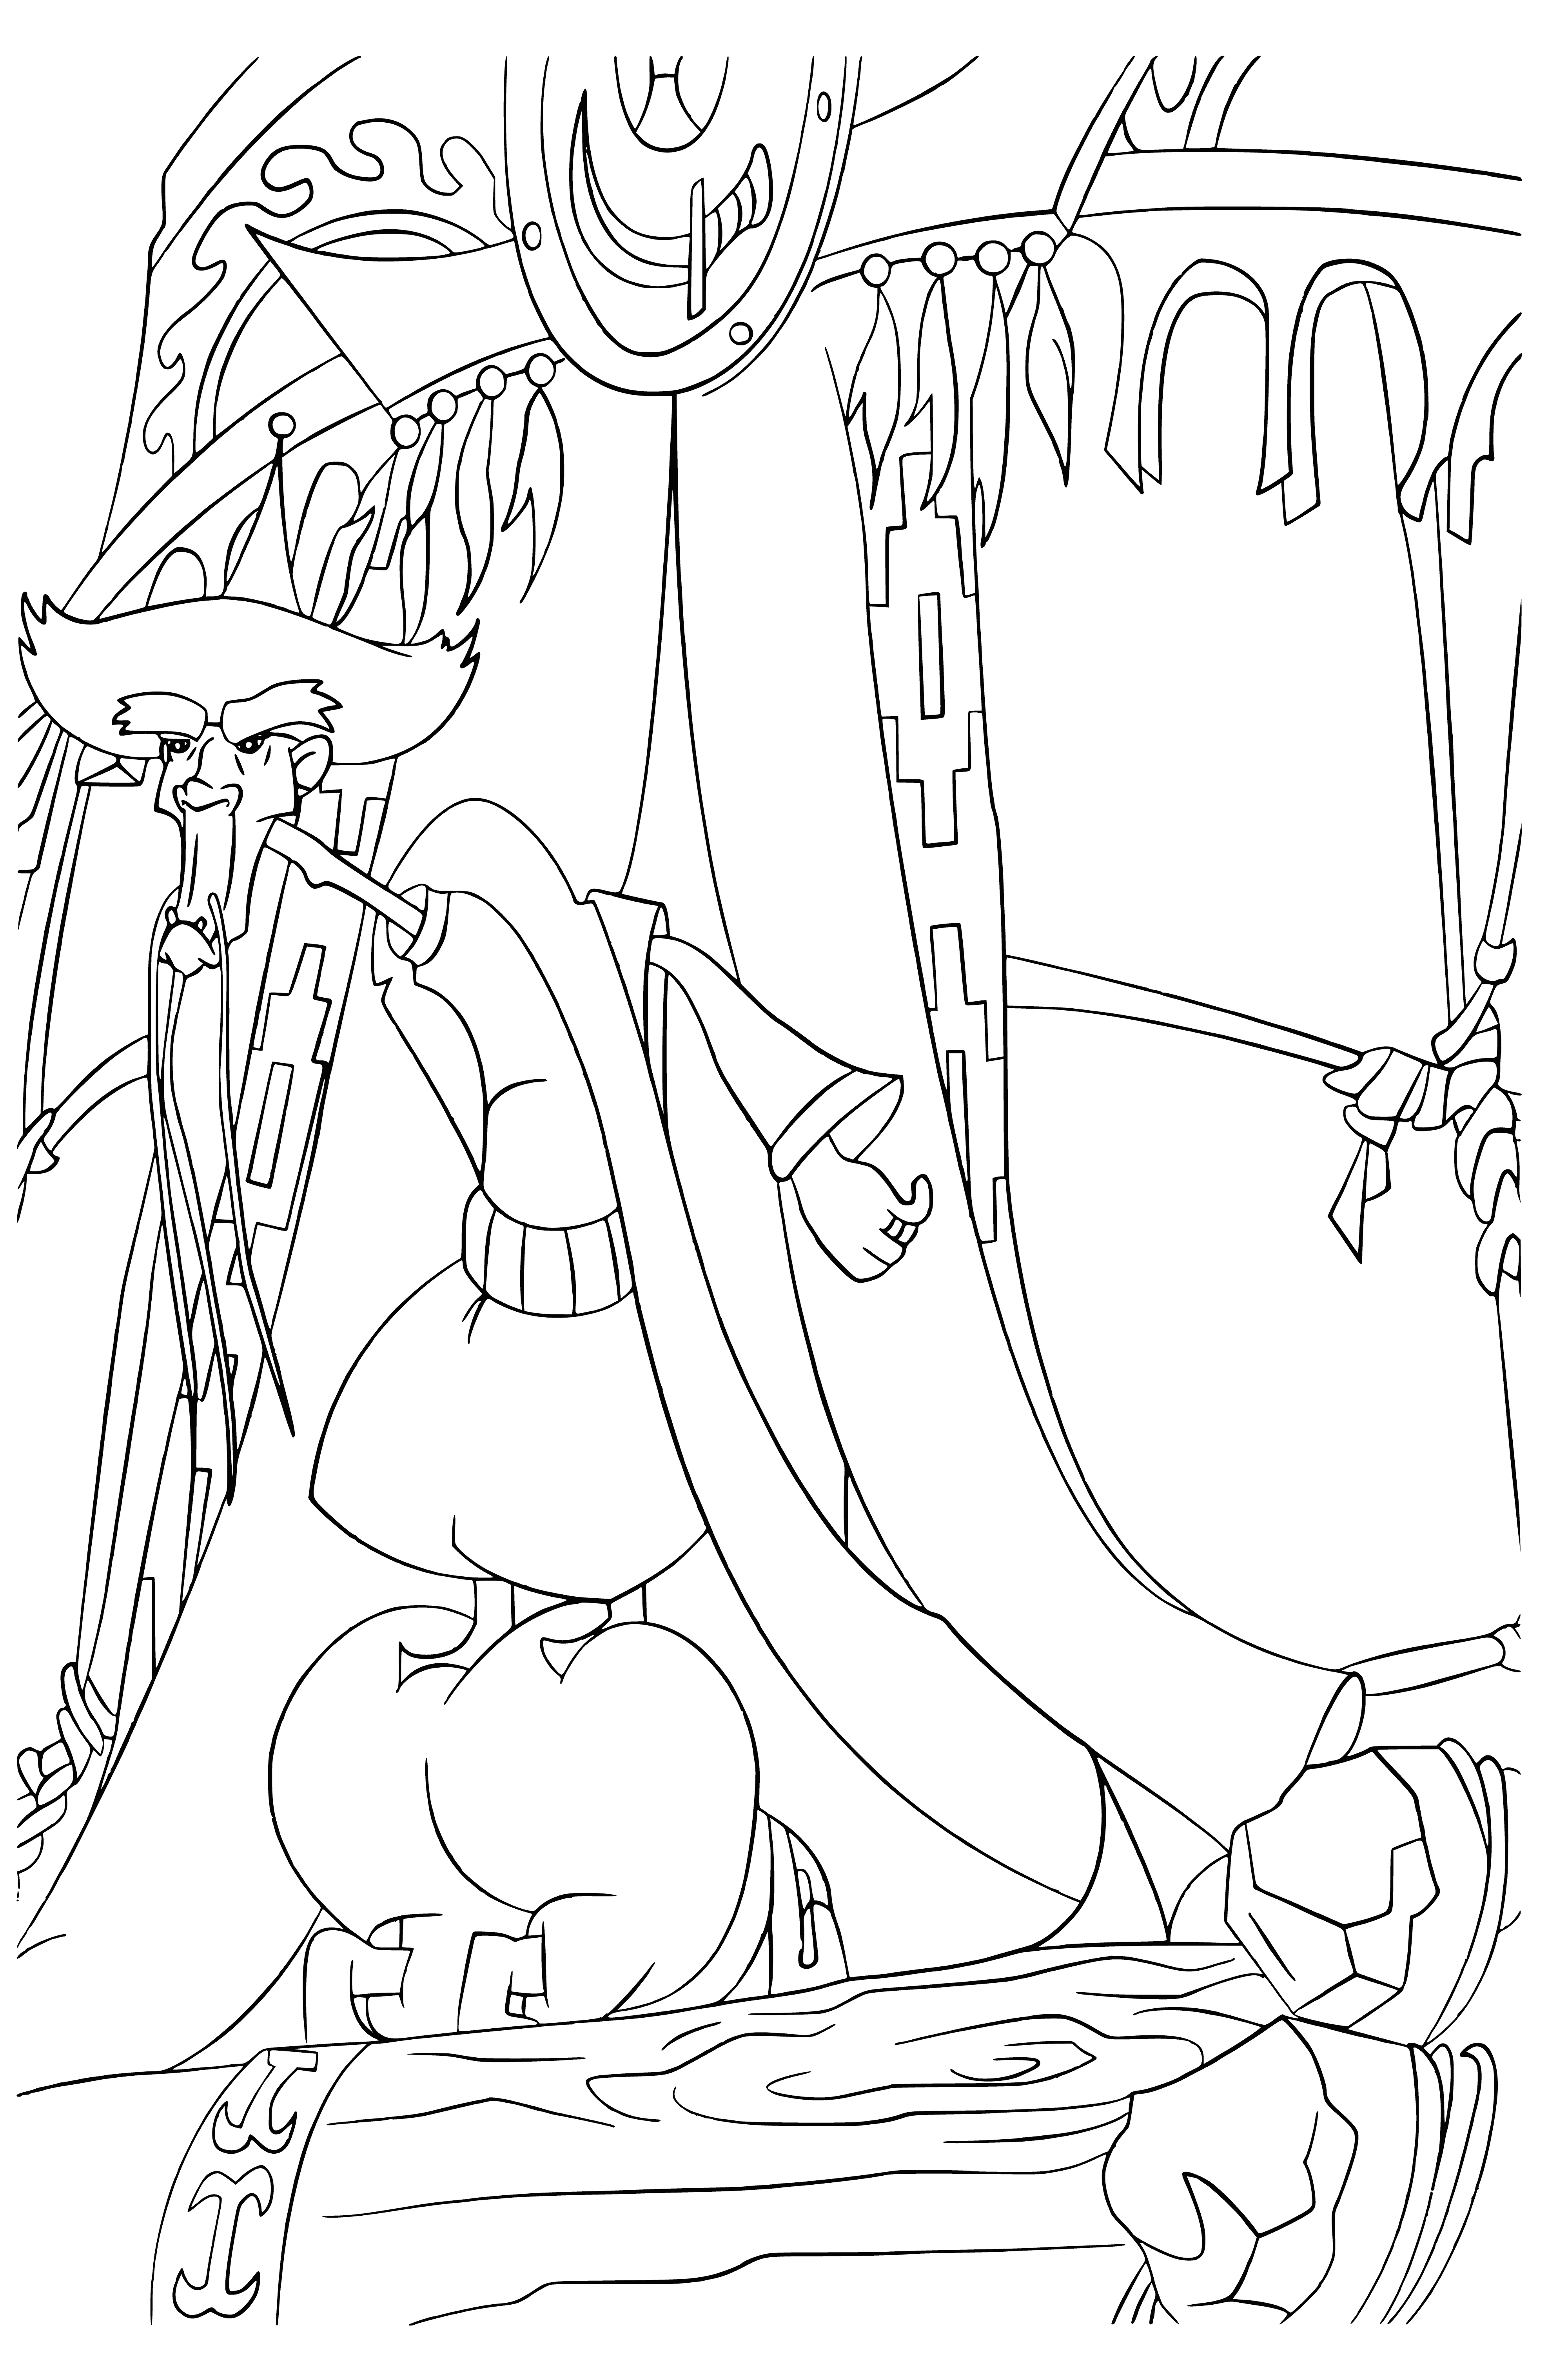 coloring page: Dobrynya Nikitich fights a large serpent monster at a giant train station.